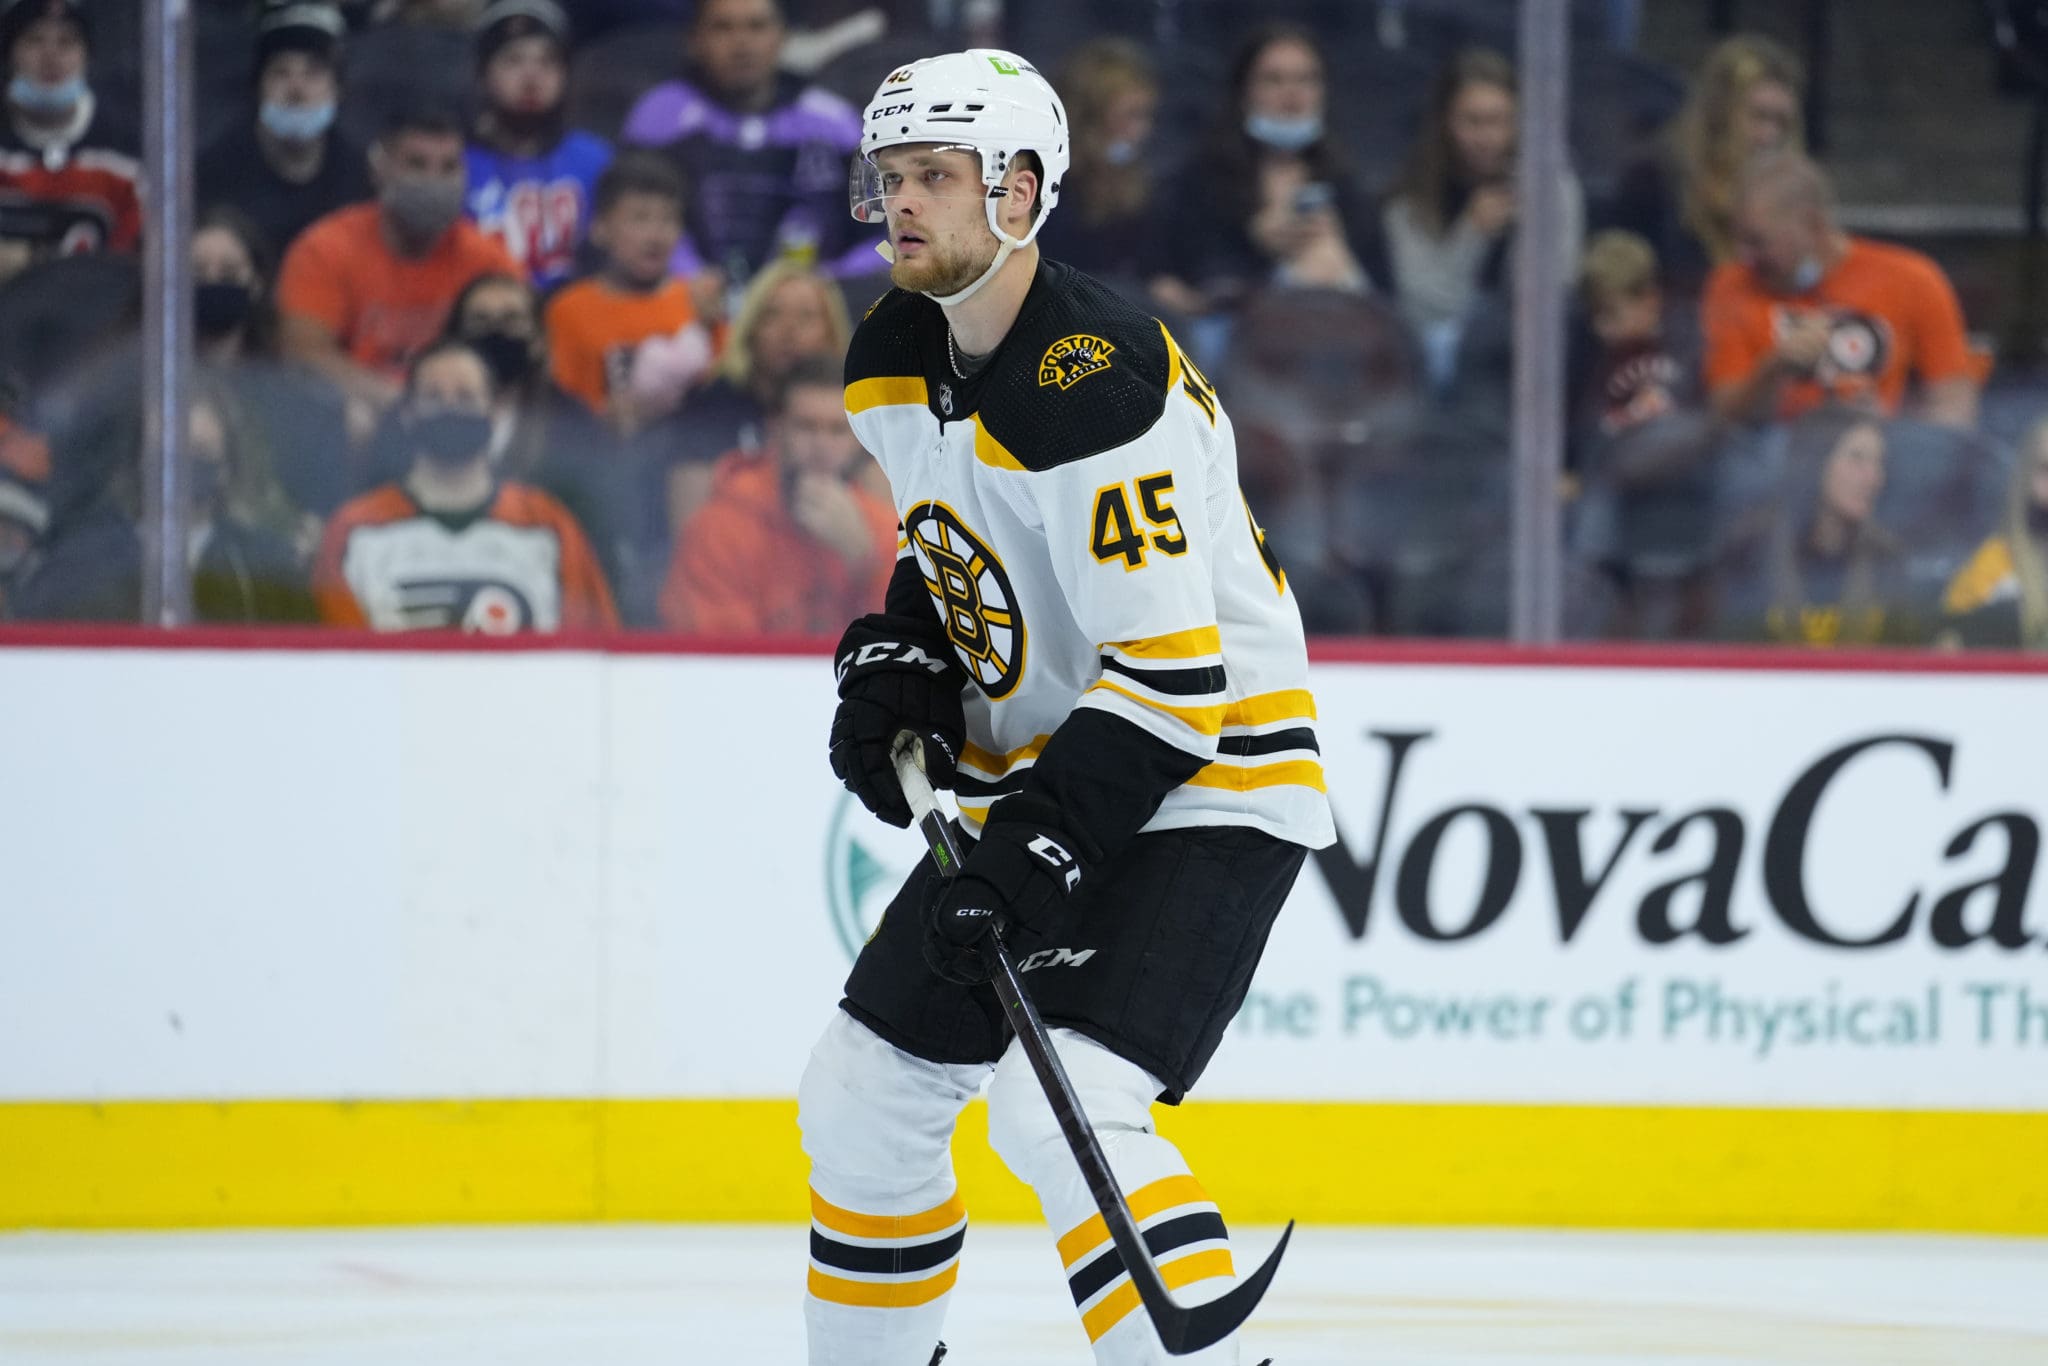 Haggs: Foligno 'Cherishes' First Winter Classic Experience with Bruins